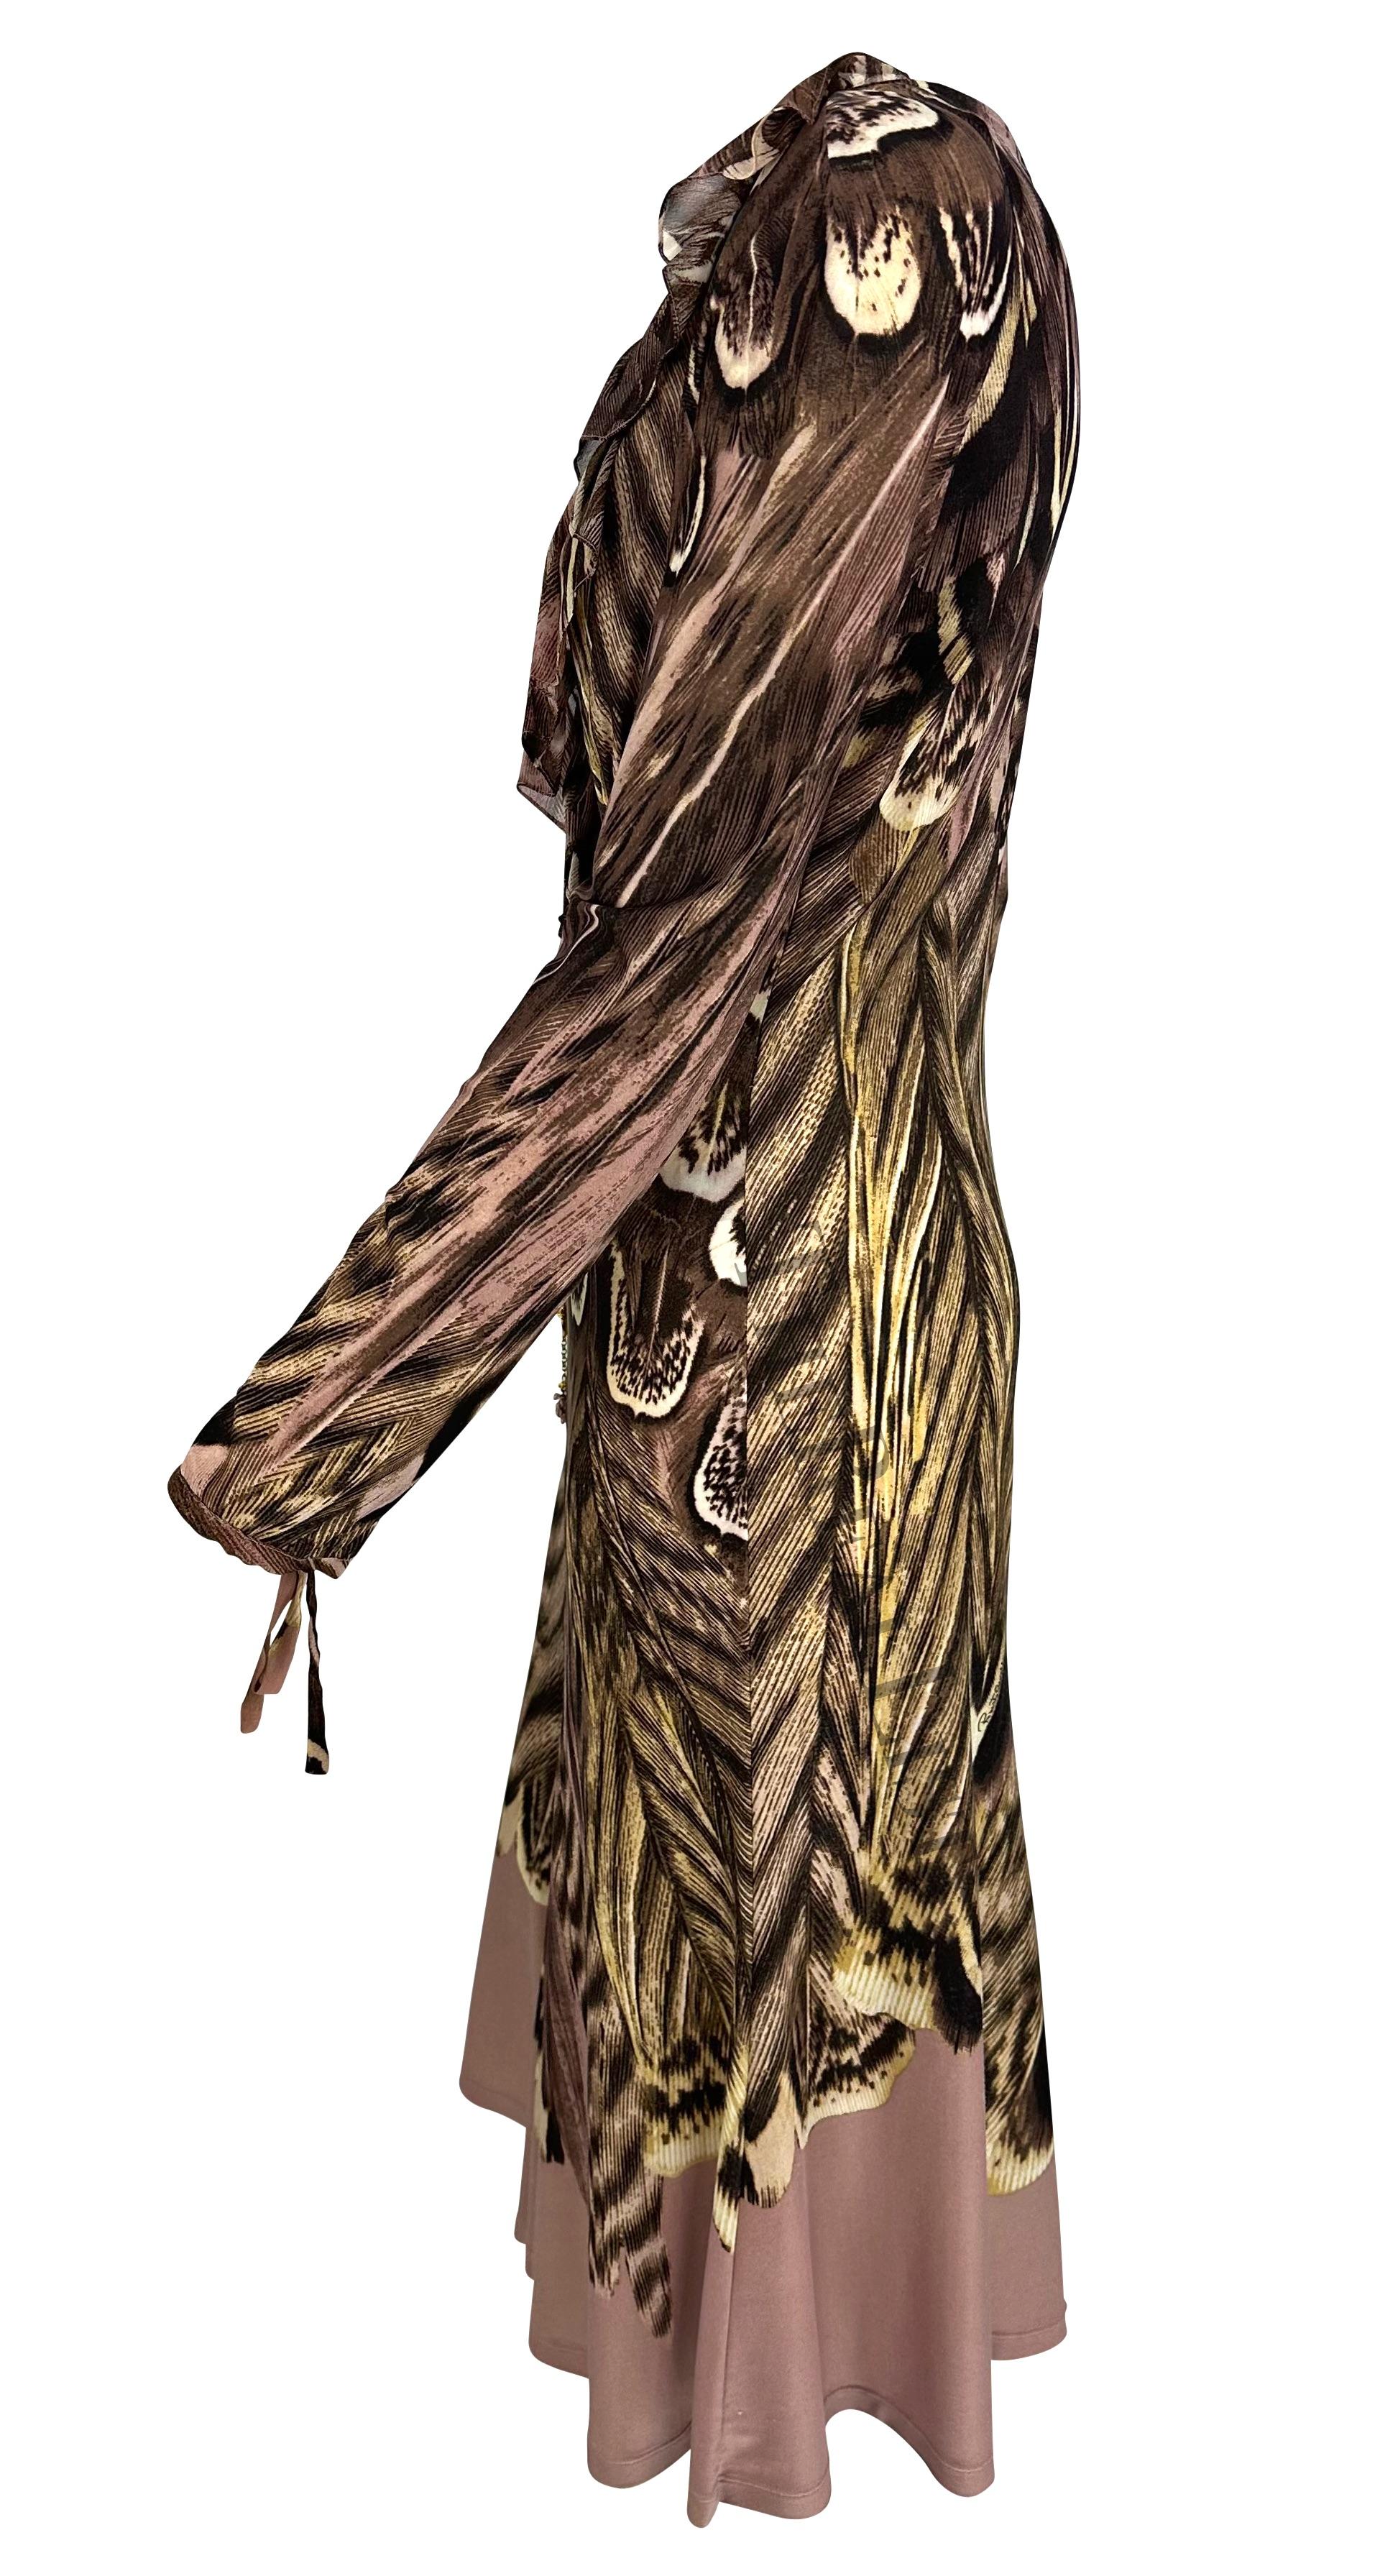 S/S 2005 Roberto Cavalli Pink Feather Print Long Sleeve Charm Dress For Sale 2